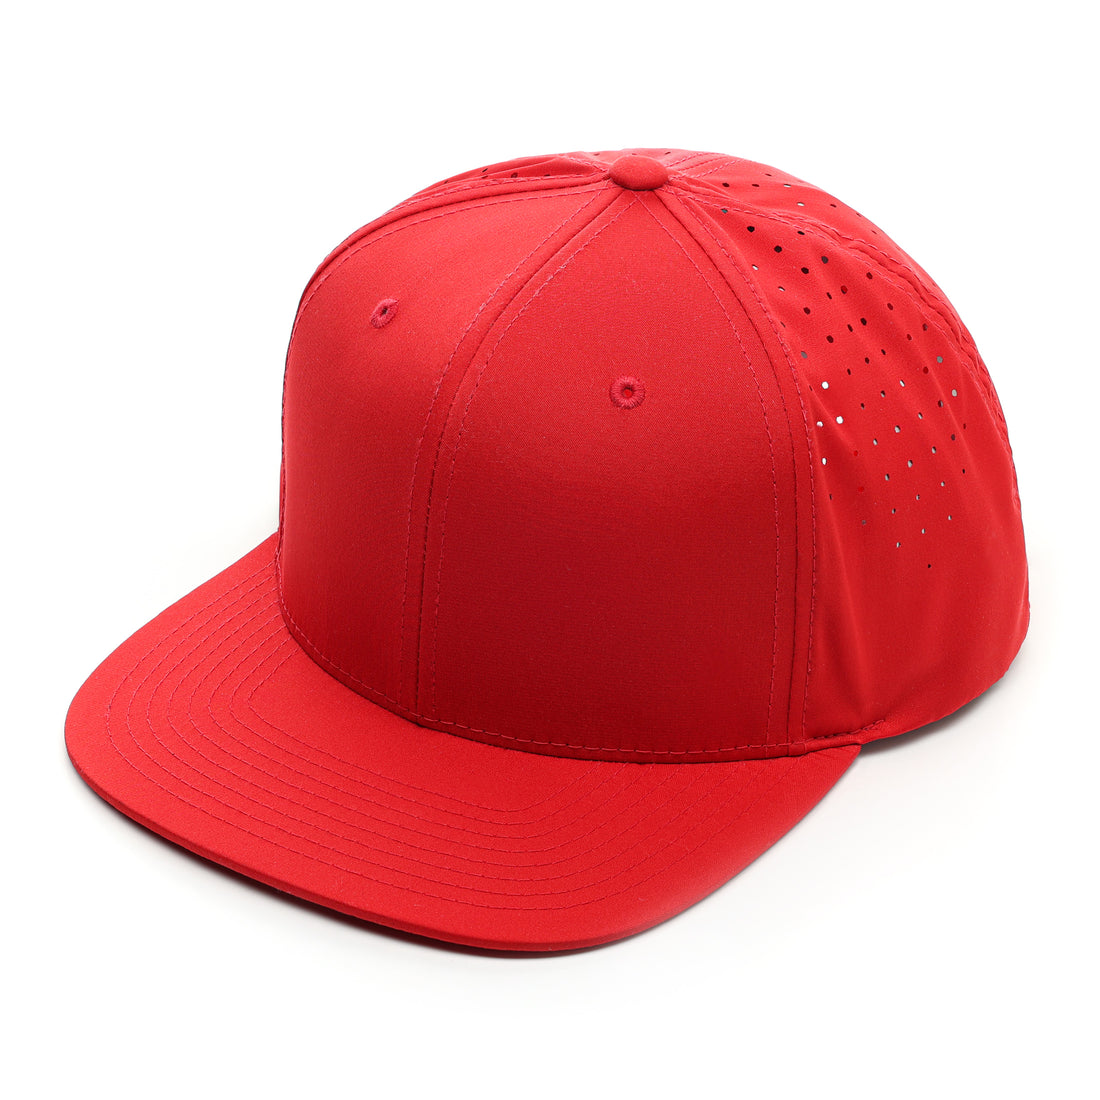 Performance Tech Hat, Melin equivalent, Red performance hat. Custom branded 